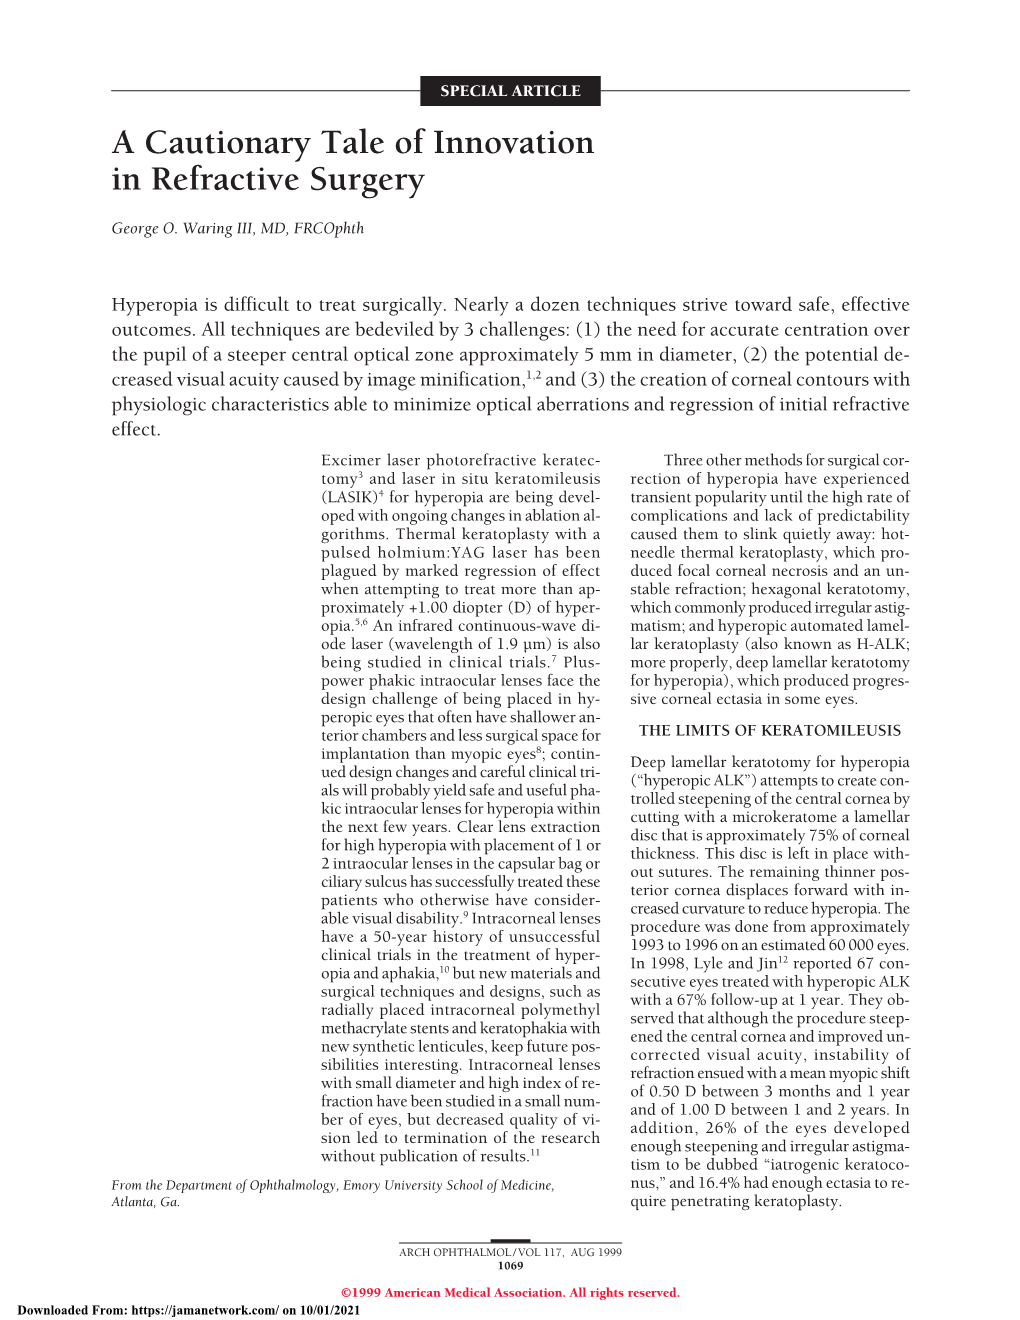 A Cautionary Tale of Innovation in Refractive Surgery